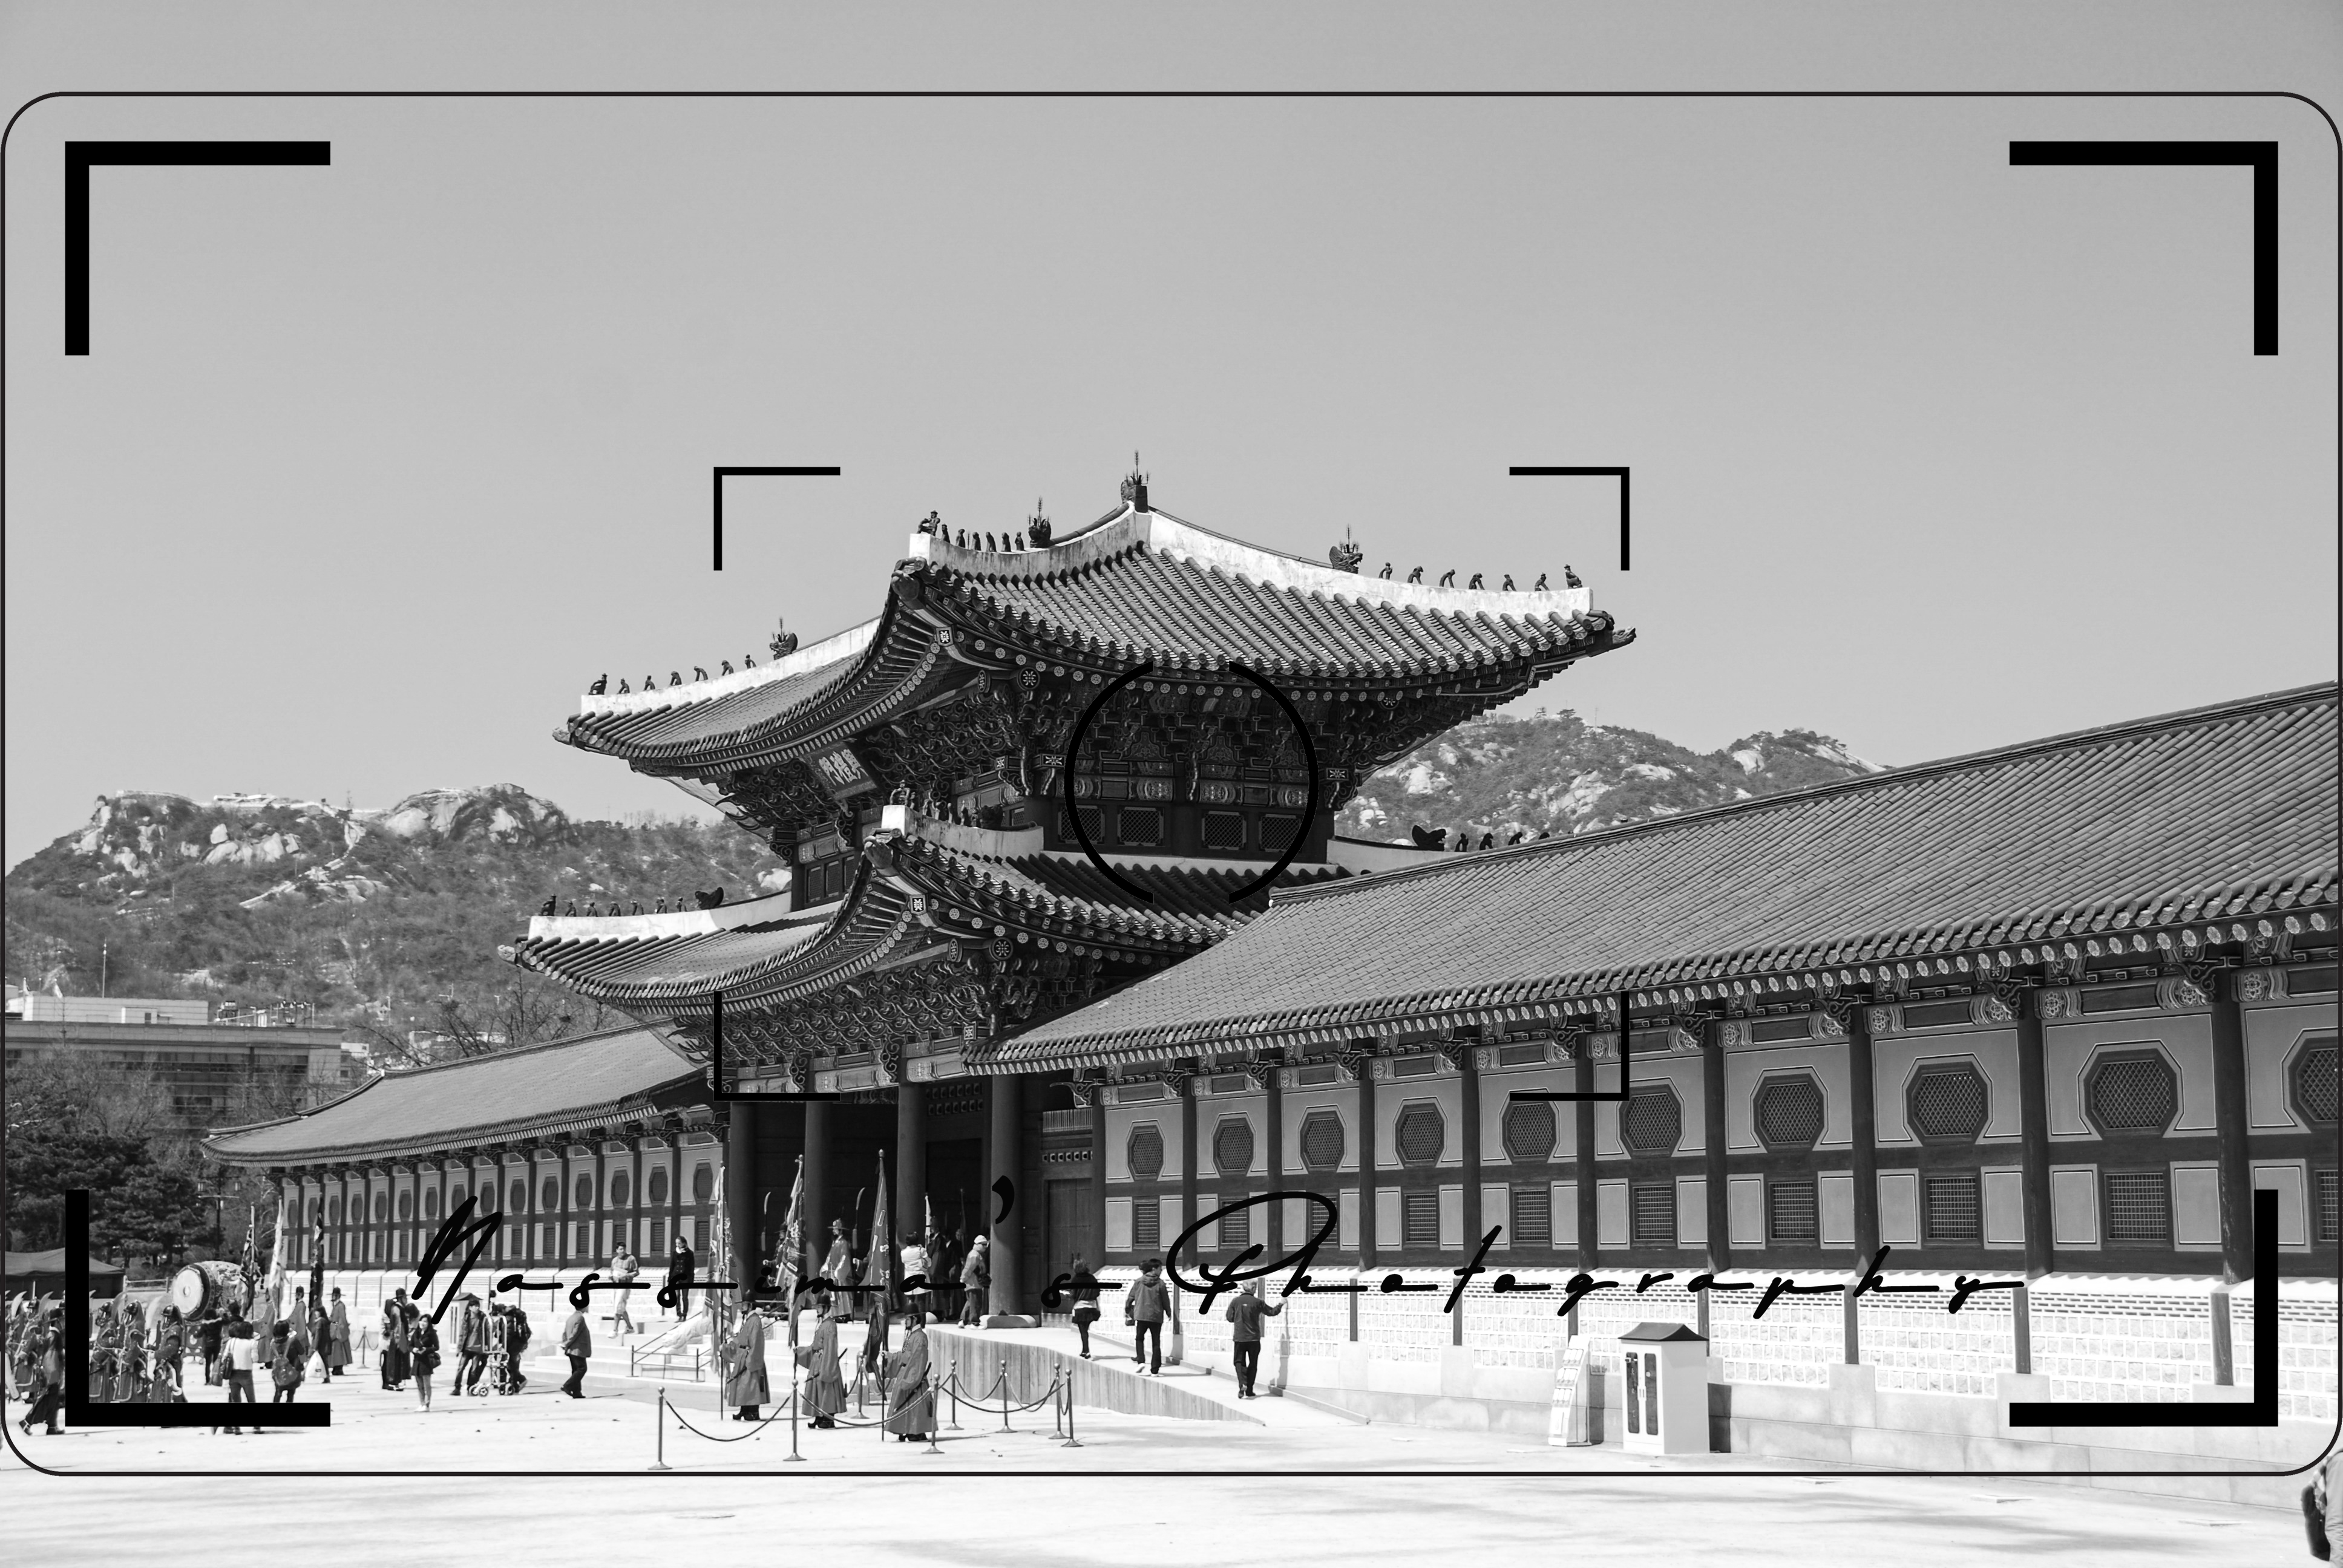 View on Gyeongbokgung palace in Seoul from the ticket counter